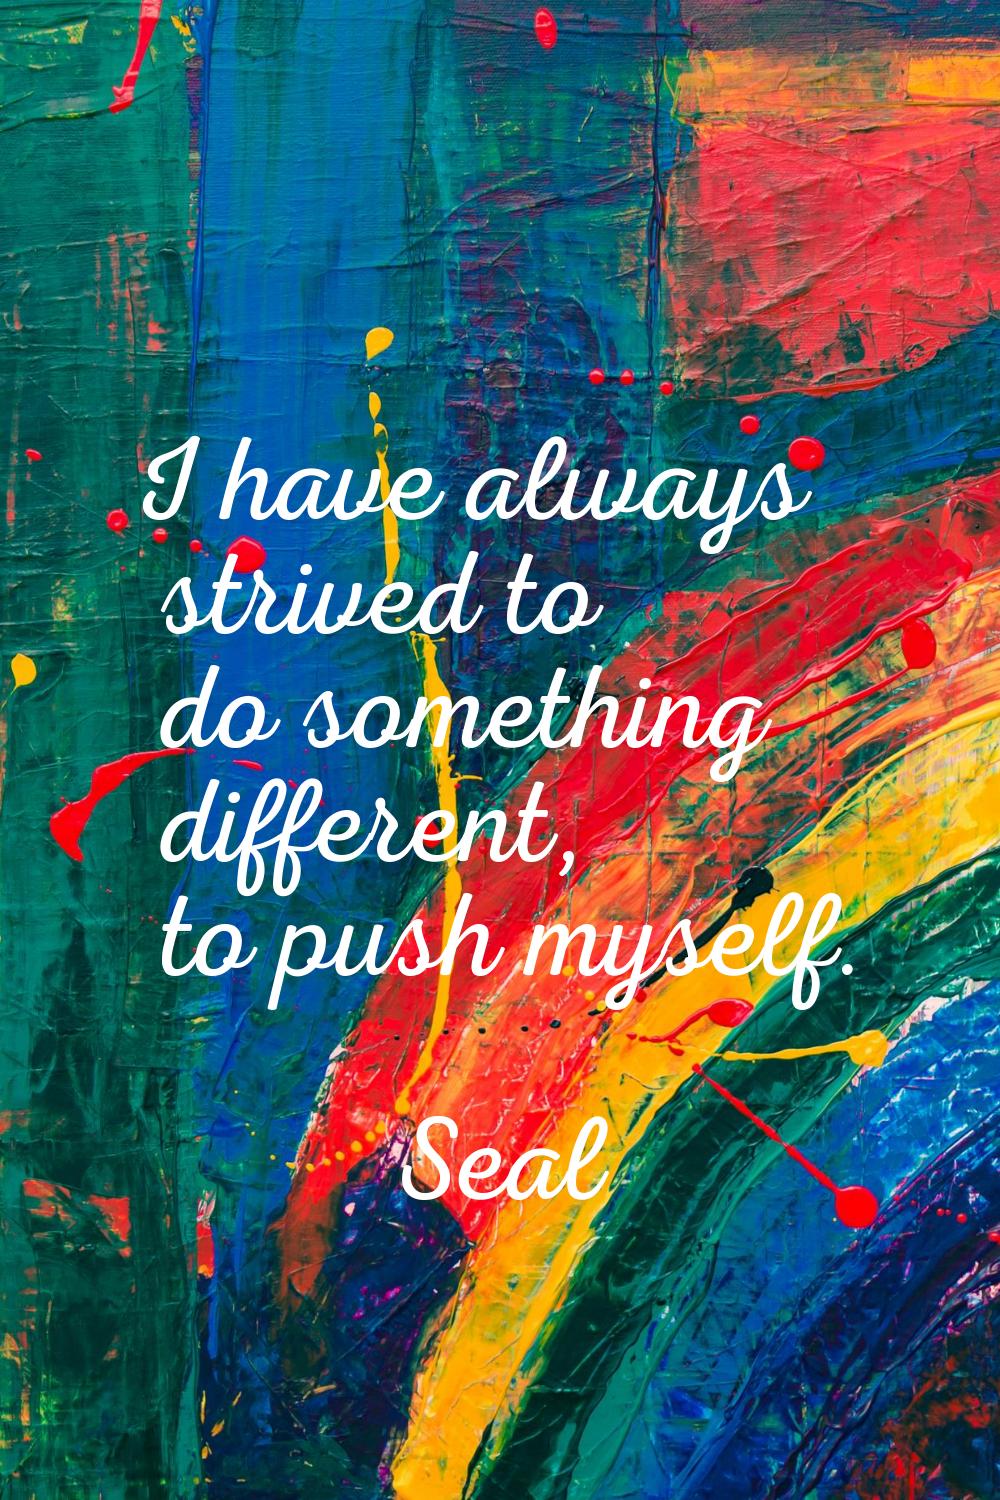 I have always strived to do something different, to push myself.